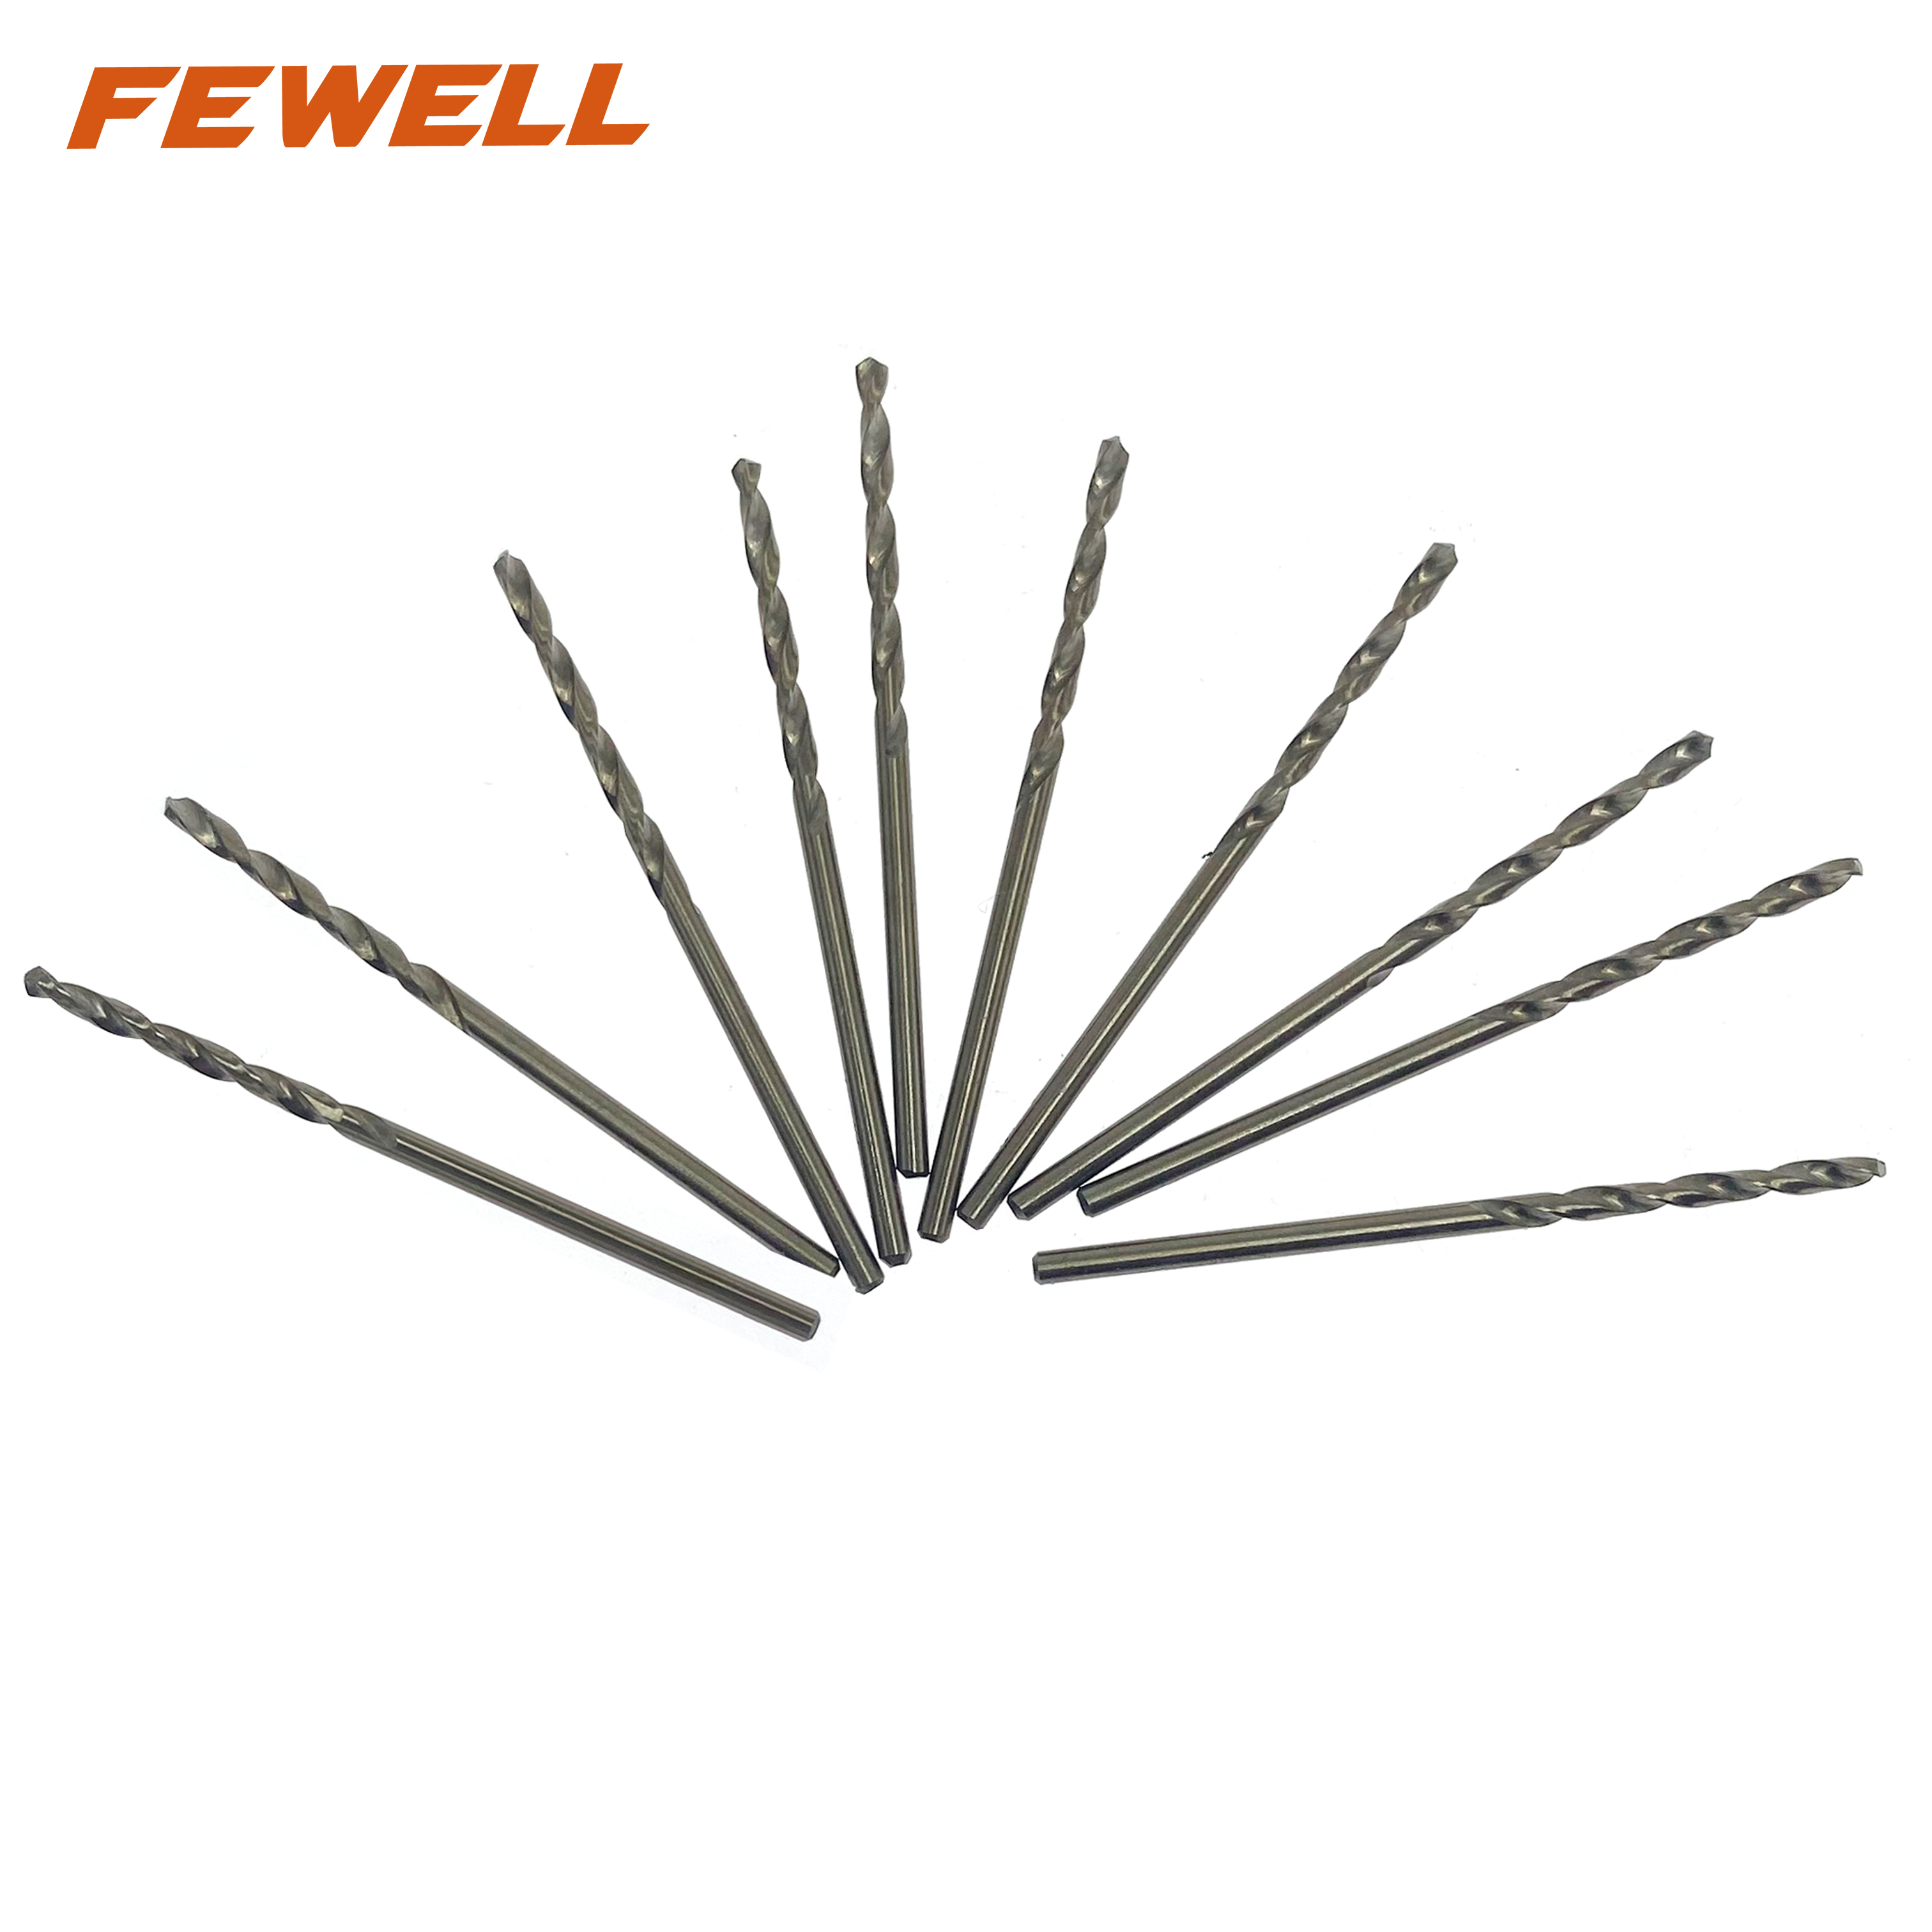 Premium quality M35 straight shank HSS twist drill bits 2-16mm for drilling Metal, inox and Stainless Steel